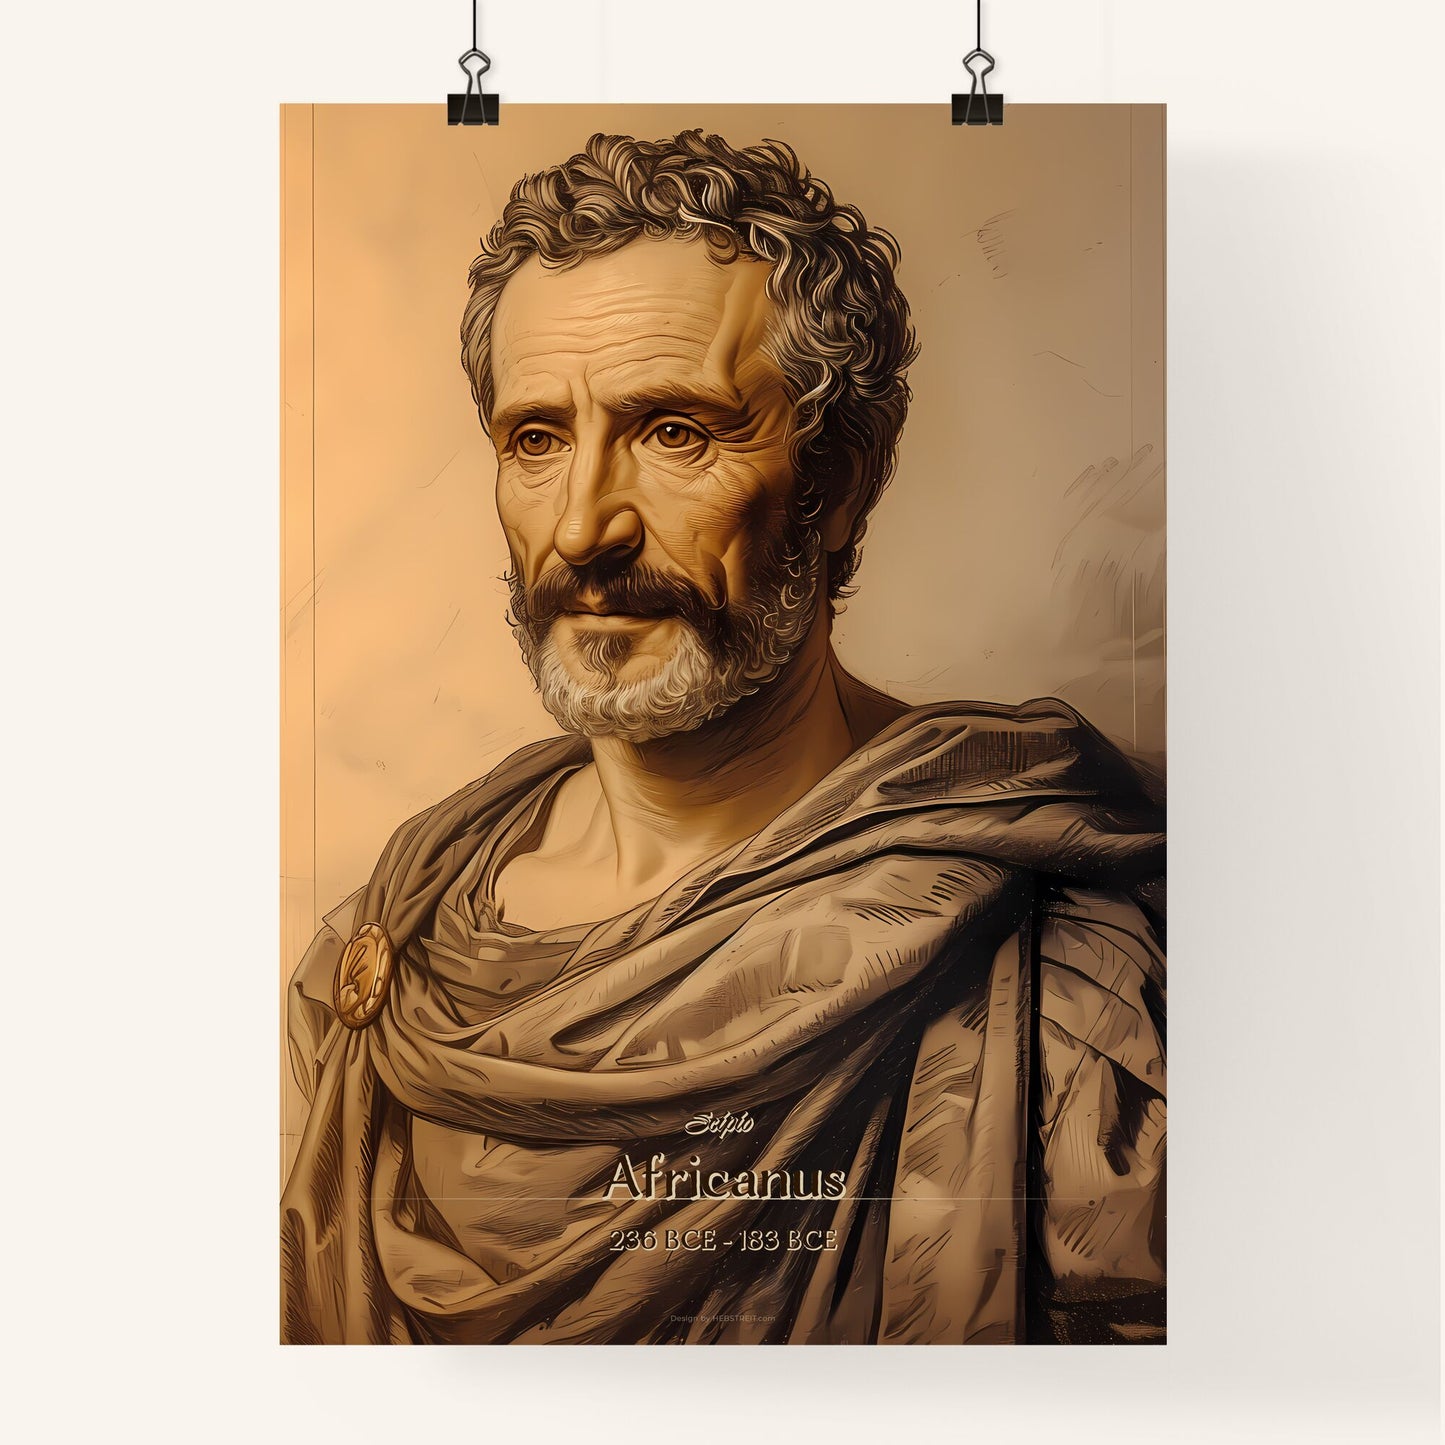 Scipio, Africanus, 236 BCE - 183 BCE, A Poster of a painting of a man wearing a robe Default Title